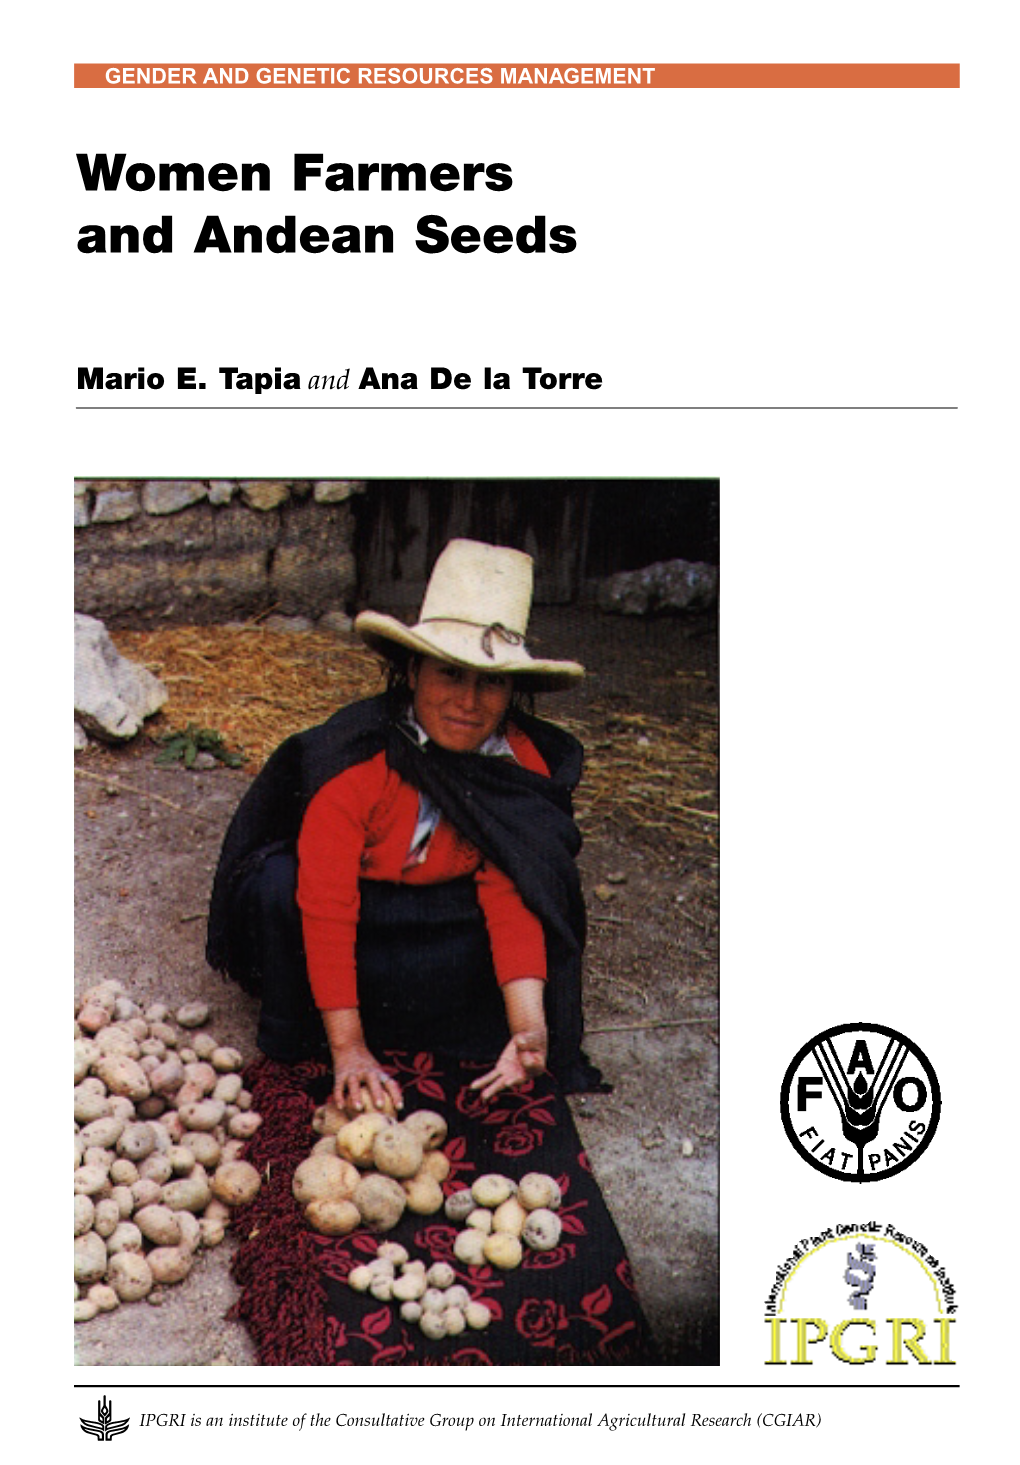 Women Farmers and Andean Seeds